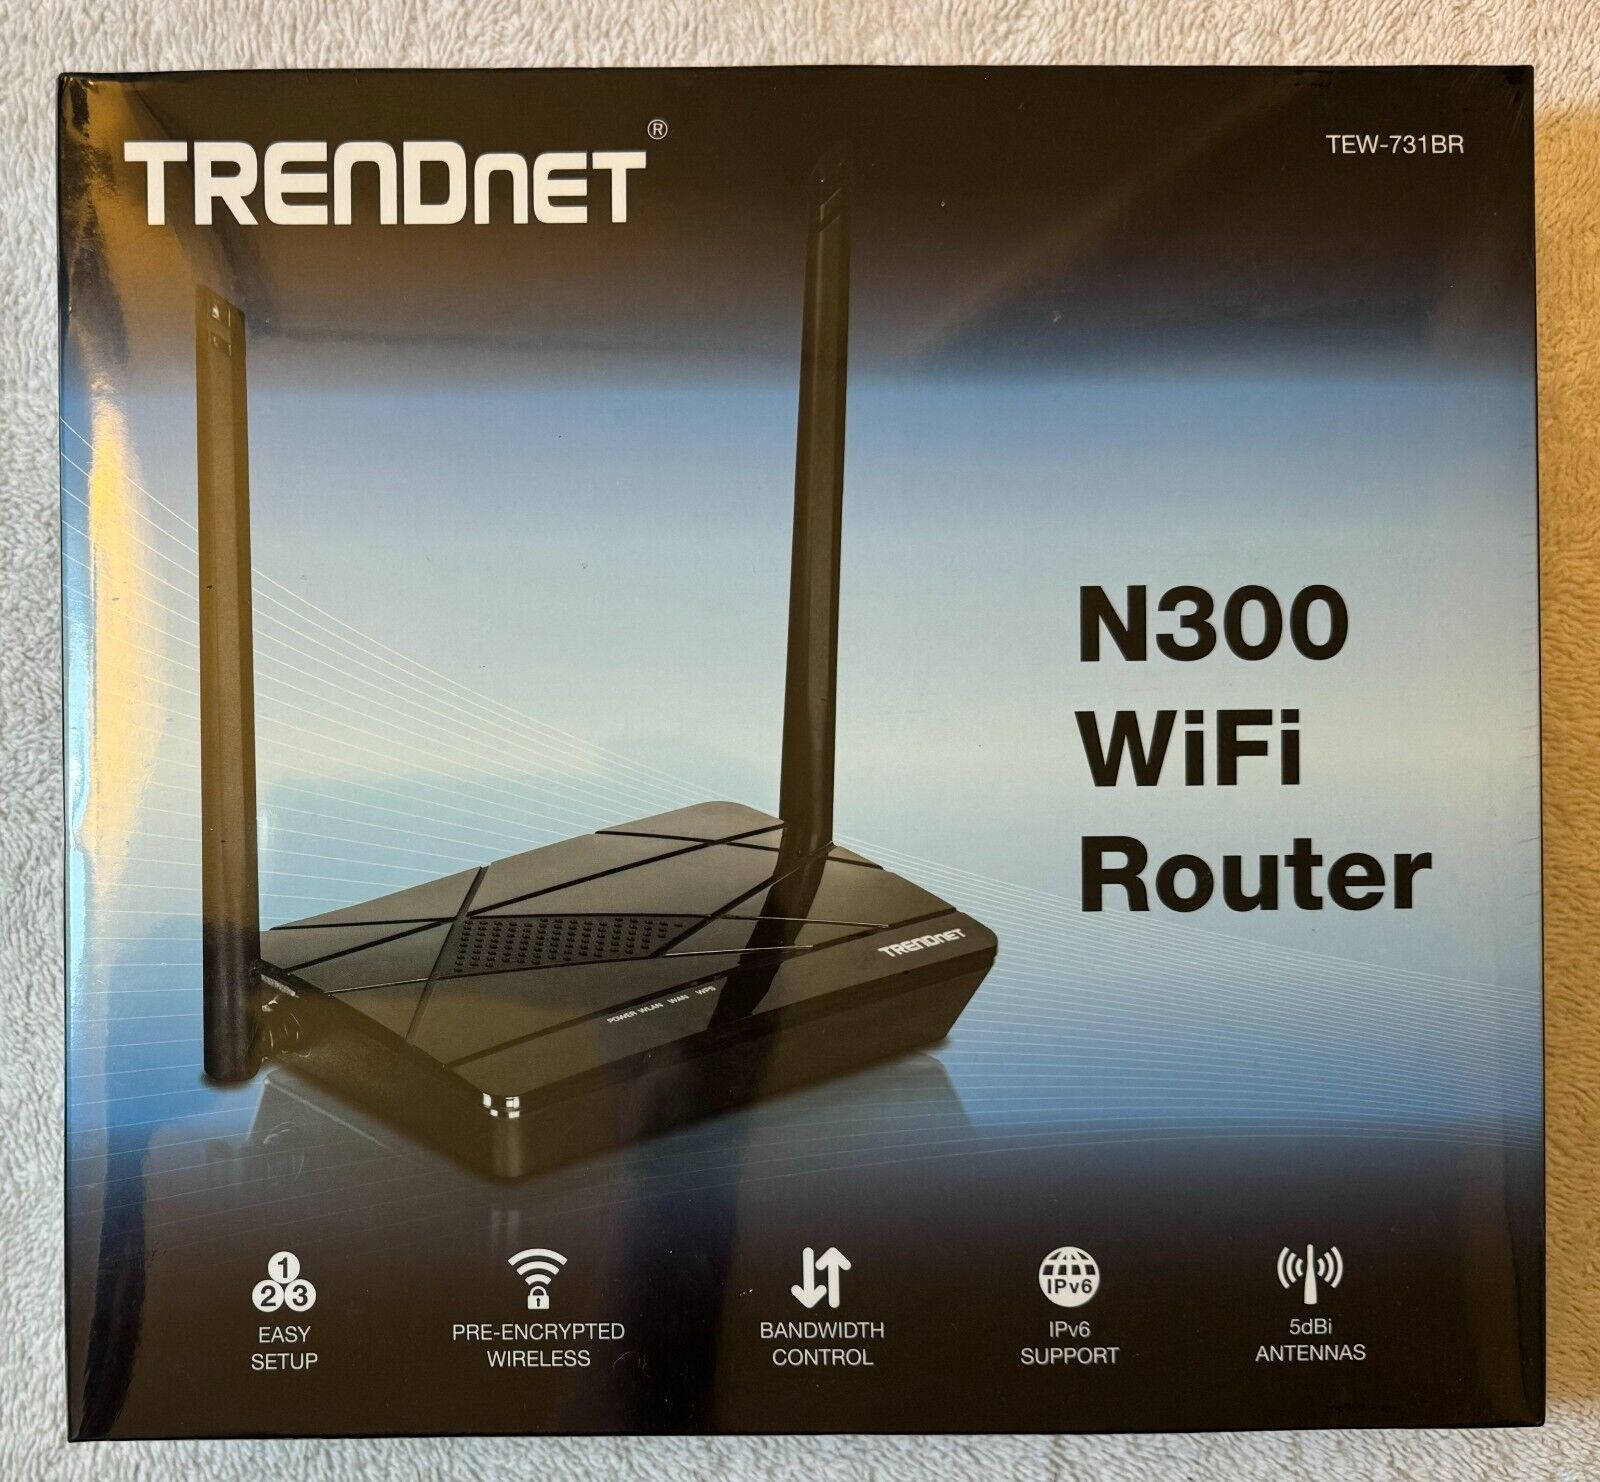 *NEW* TRENDnet N300 300Mbps Wireless WiFi Router